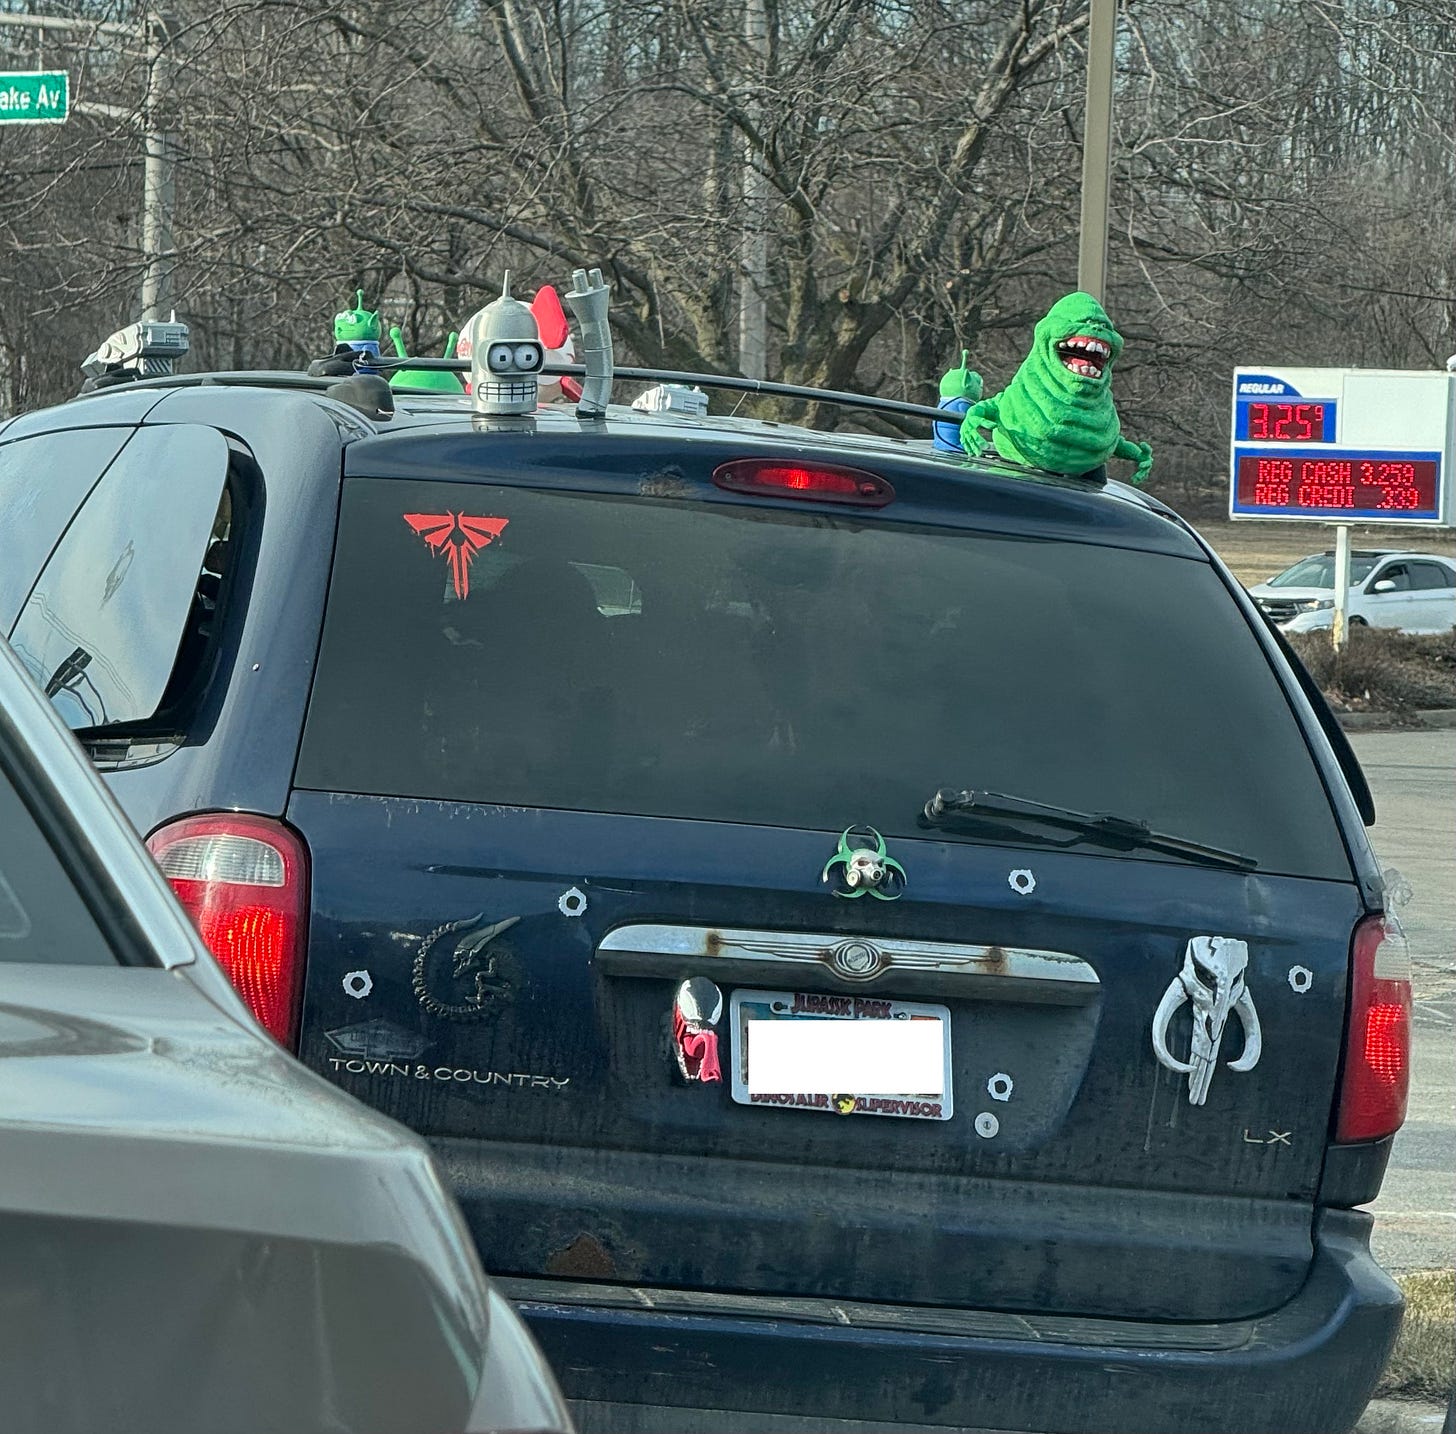 A dark blue Town & Country minivan with a Slimer from Ghostbusters and Bender from Futurama, among other figurines, glued to the roof